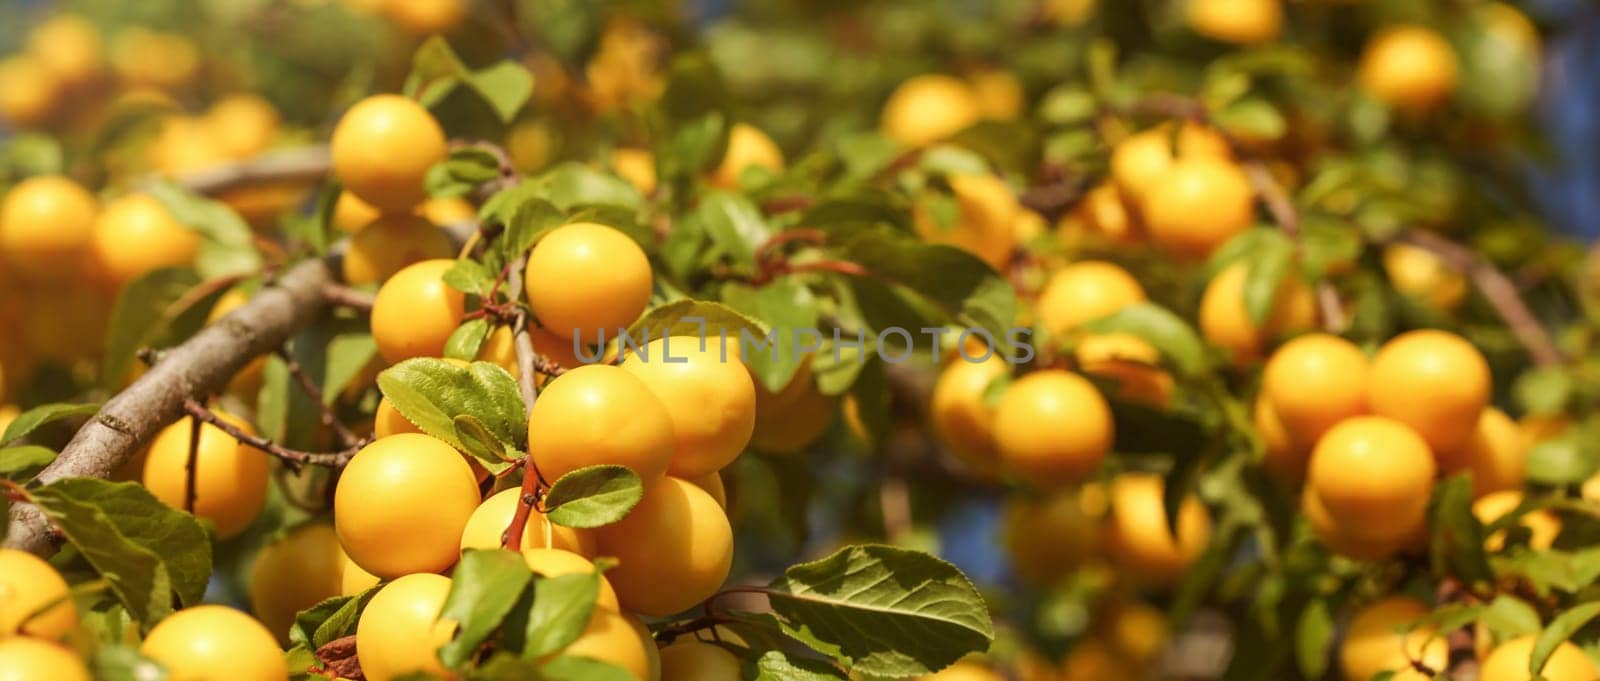 Ripe yellow mirabelle plums on ;eaves covered tree branches. (Prunus domestica syriaca) Wide banner.